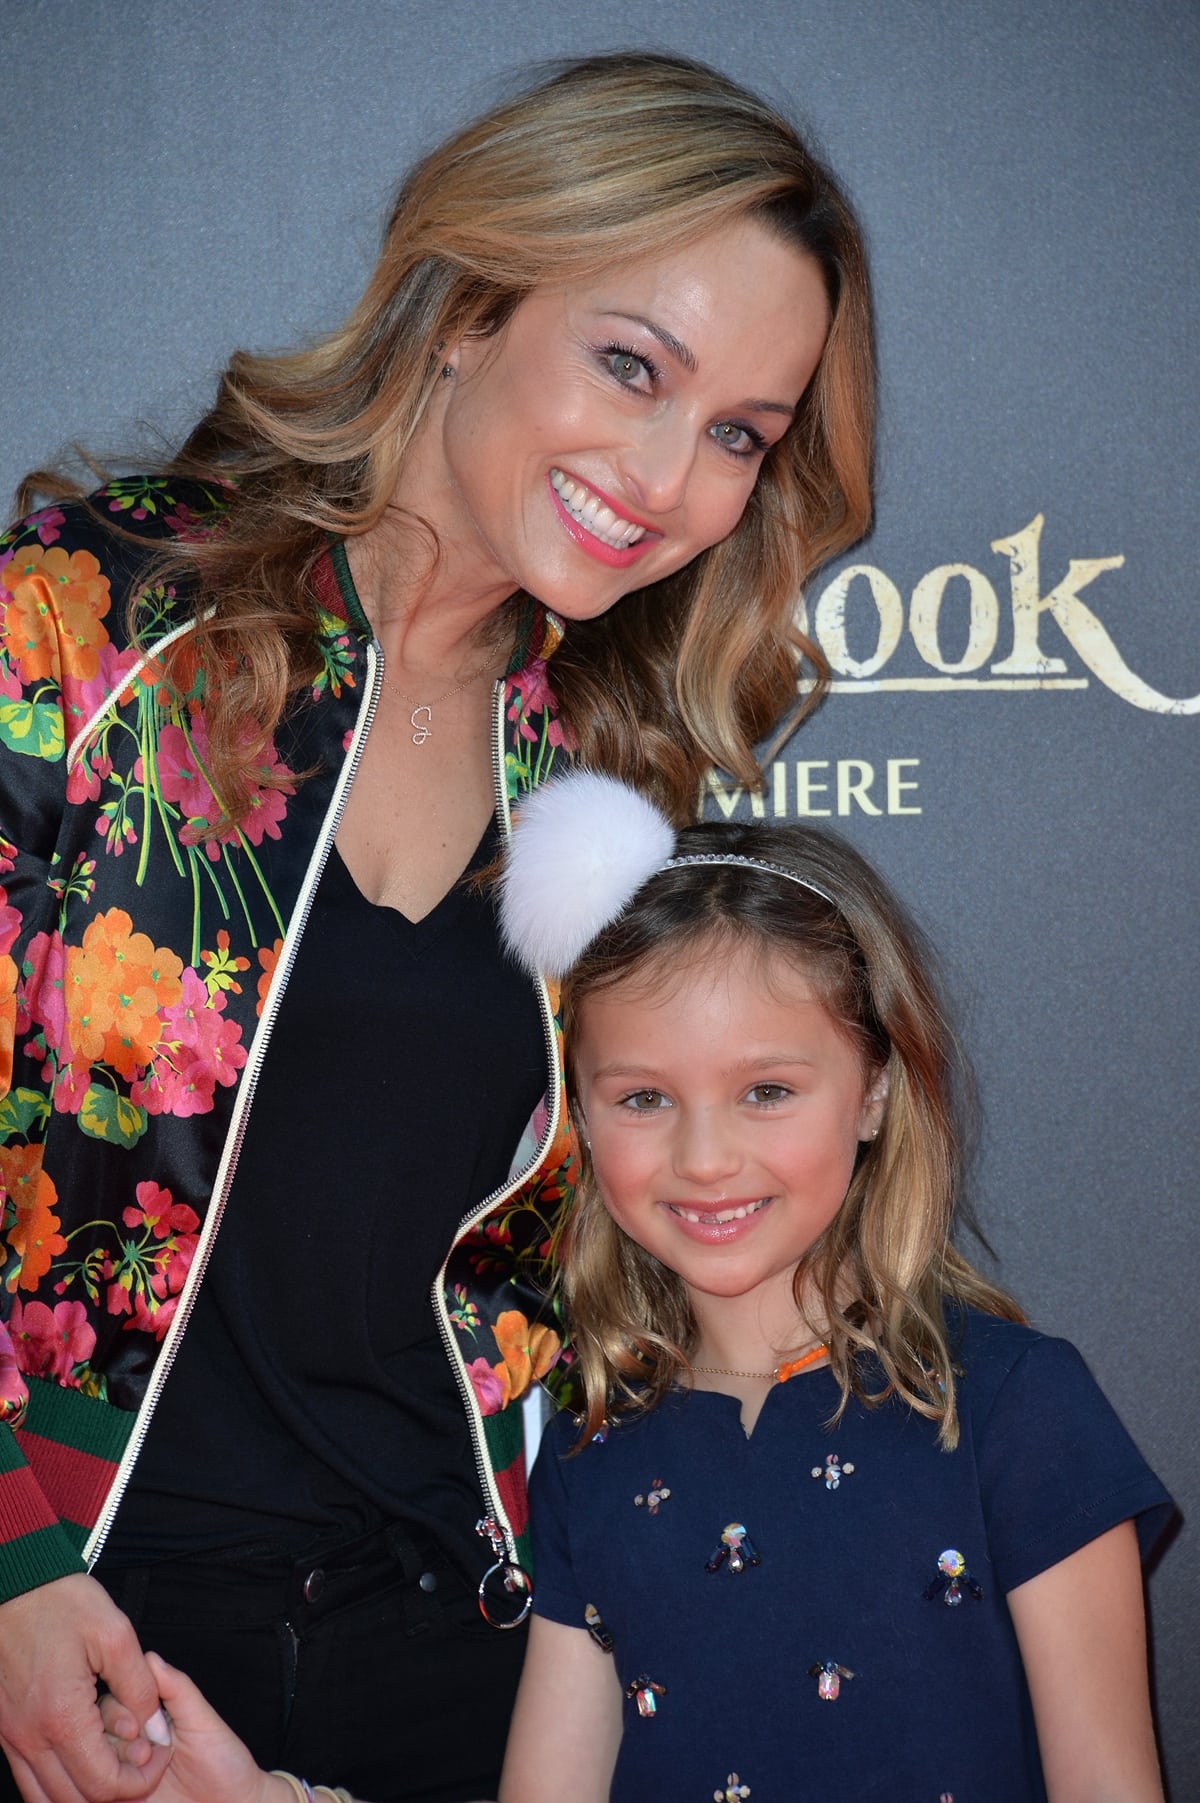 Giada De Laurentiis and her daughter Jade Marie De Laurentiis Thompson arrive at the Los Angeles premiere of "The Jungle Book" held April 4, 2016 at the El Capitan Theatre in Hollywood